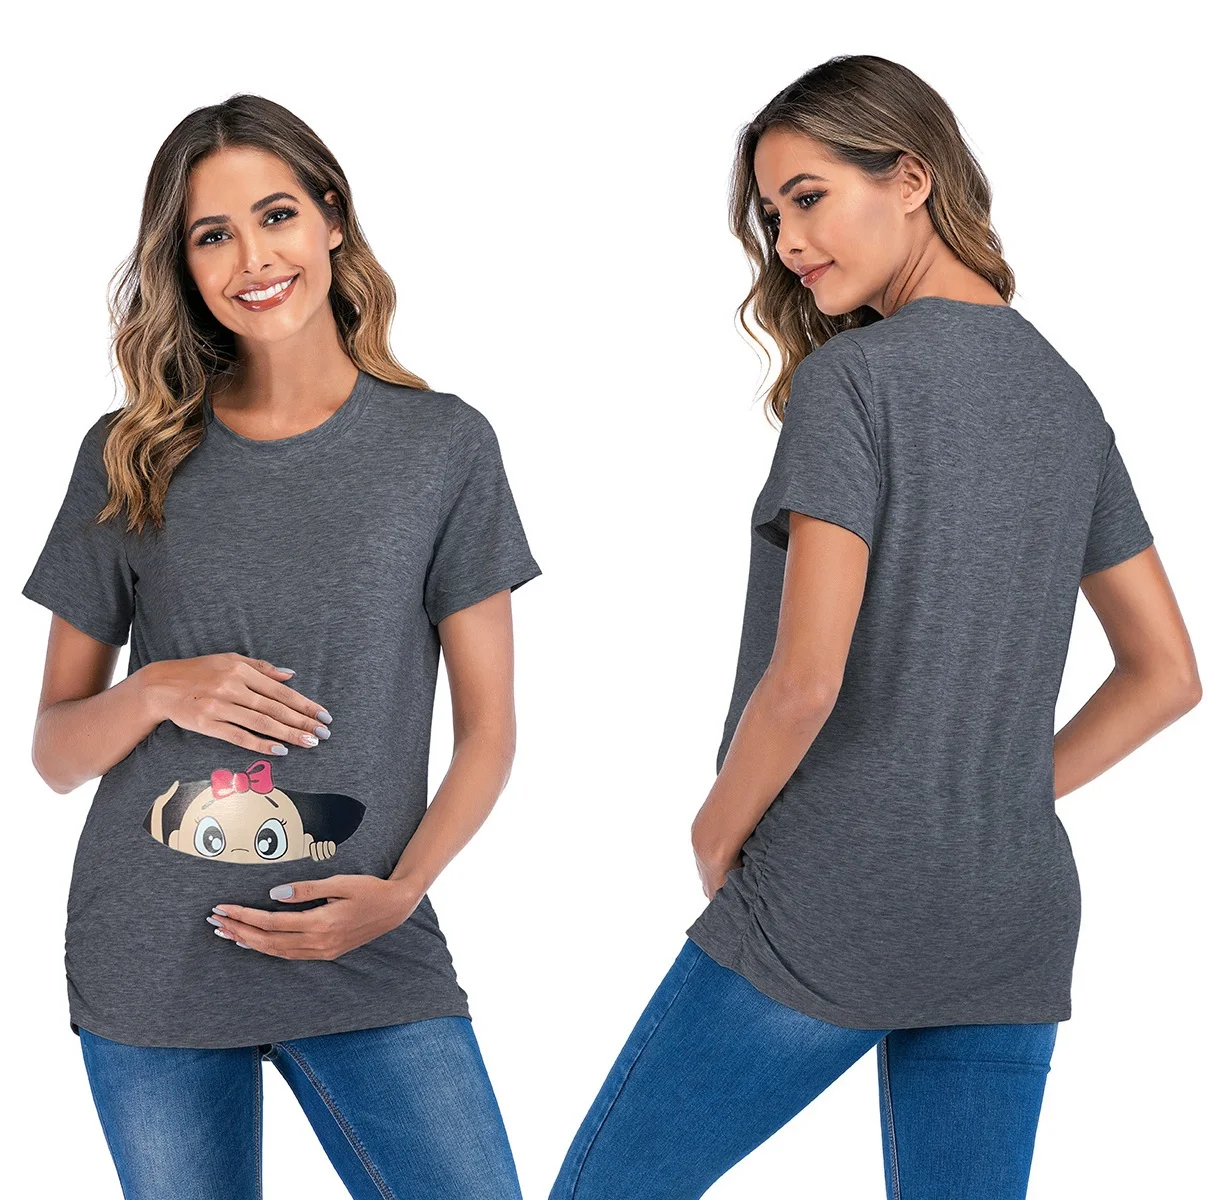 

Womens Maternity T Shirts Top Baby Print Pregnancy Tee Top Tunic Blouse Boat Neck Casual Mama Love Top Clothes